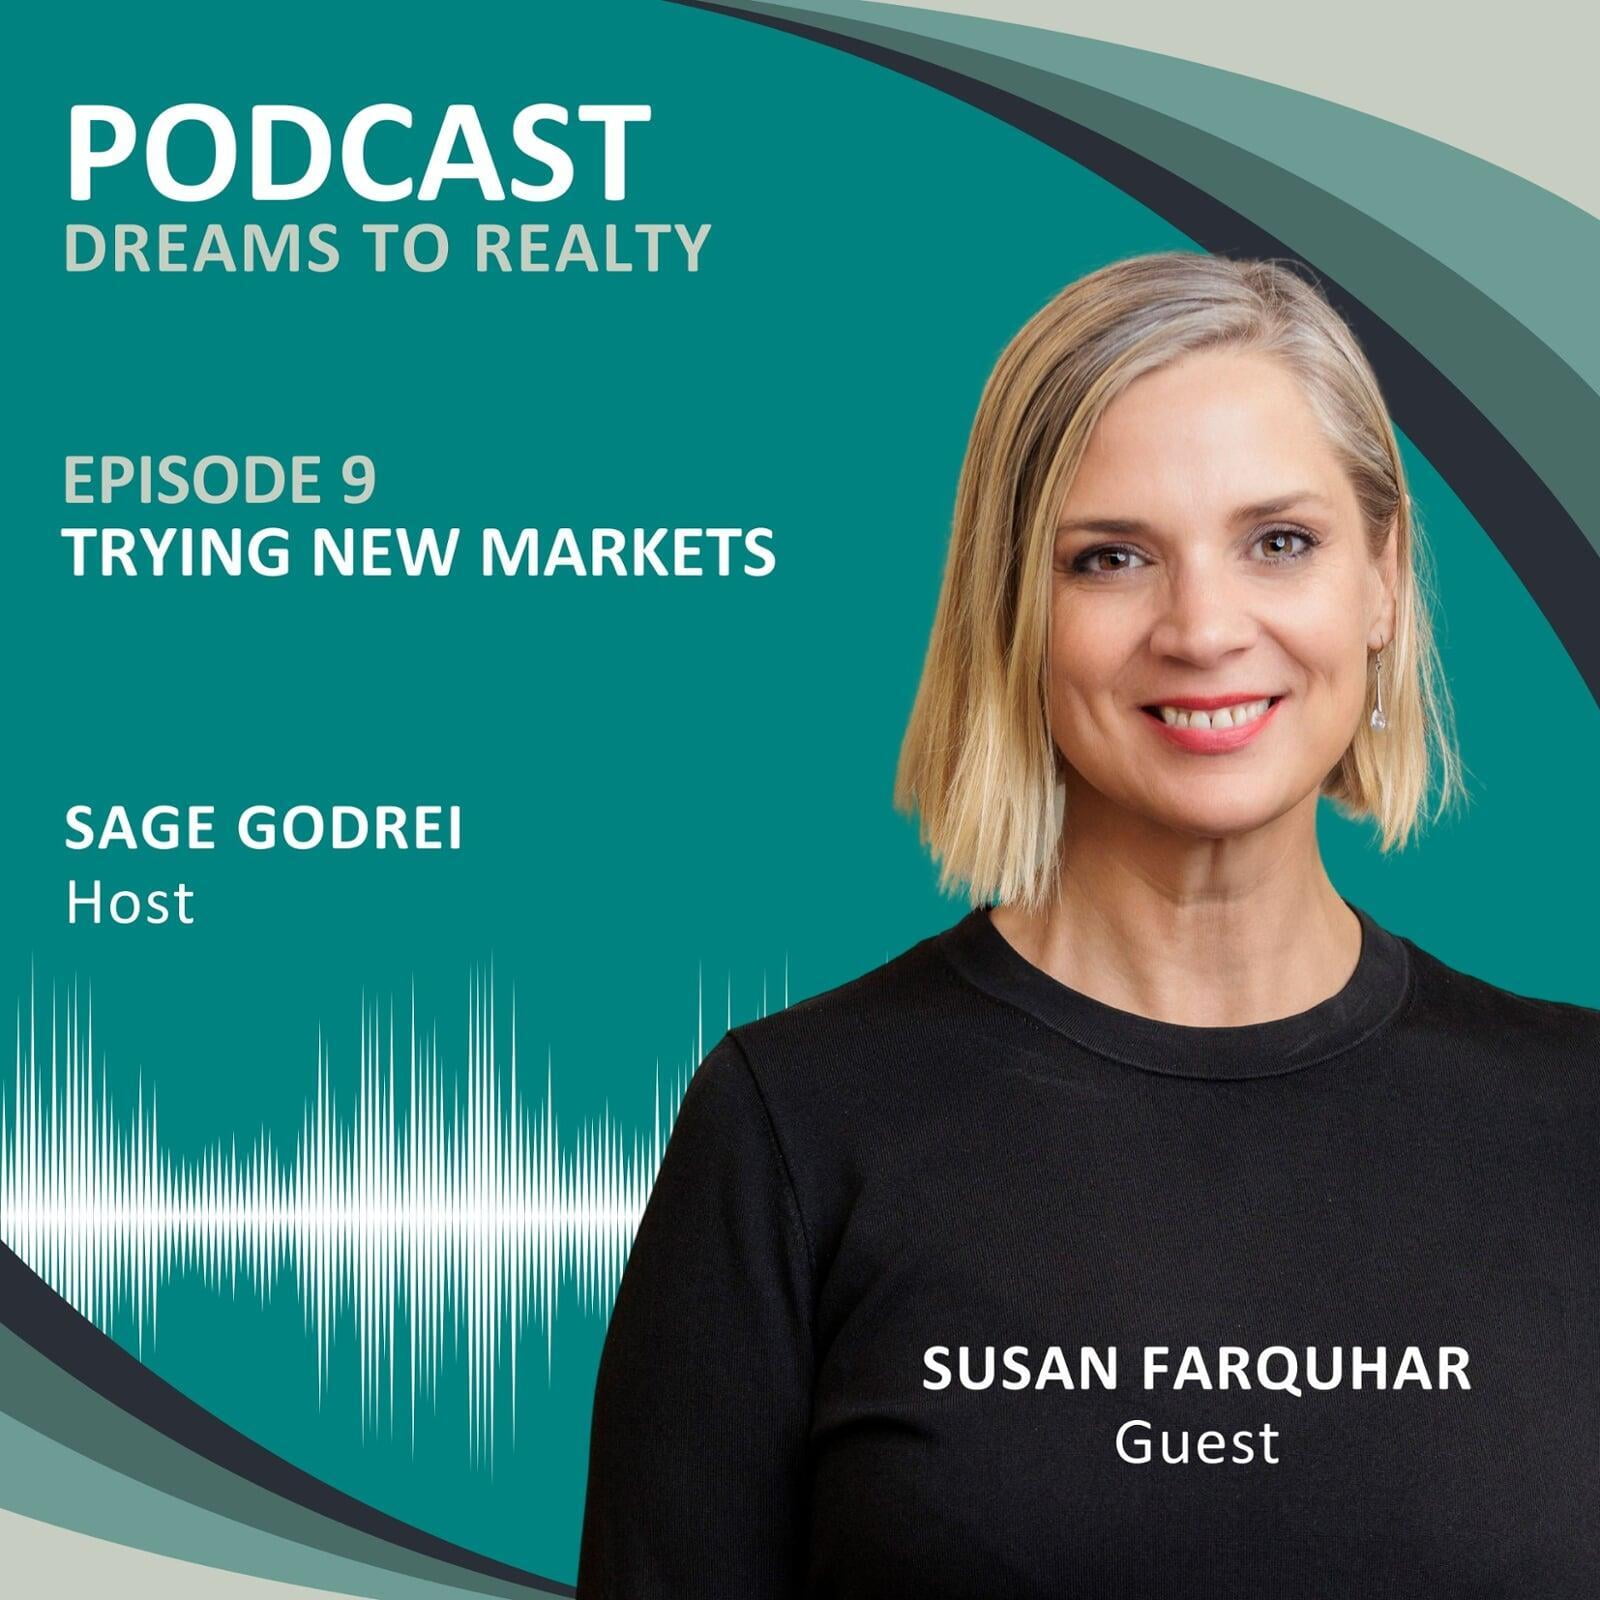 PODCAST: Dreams To Realty Property Investment Insights - Episode 9 Trying New Markets